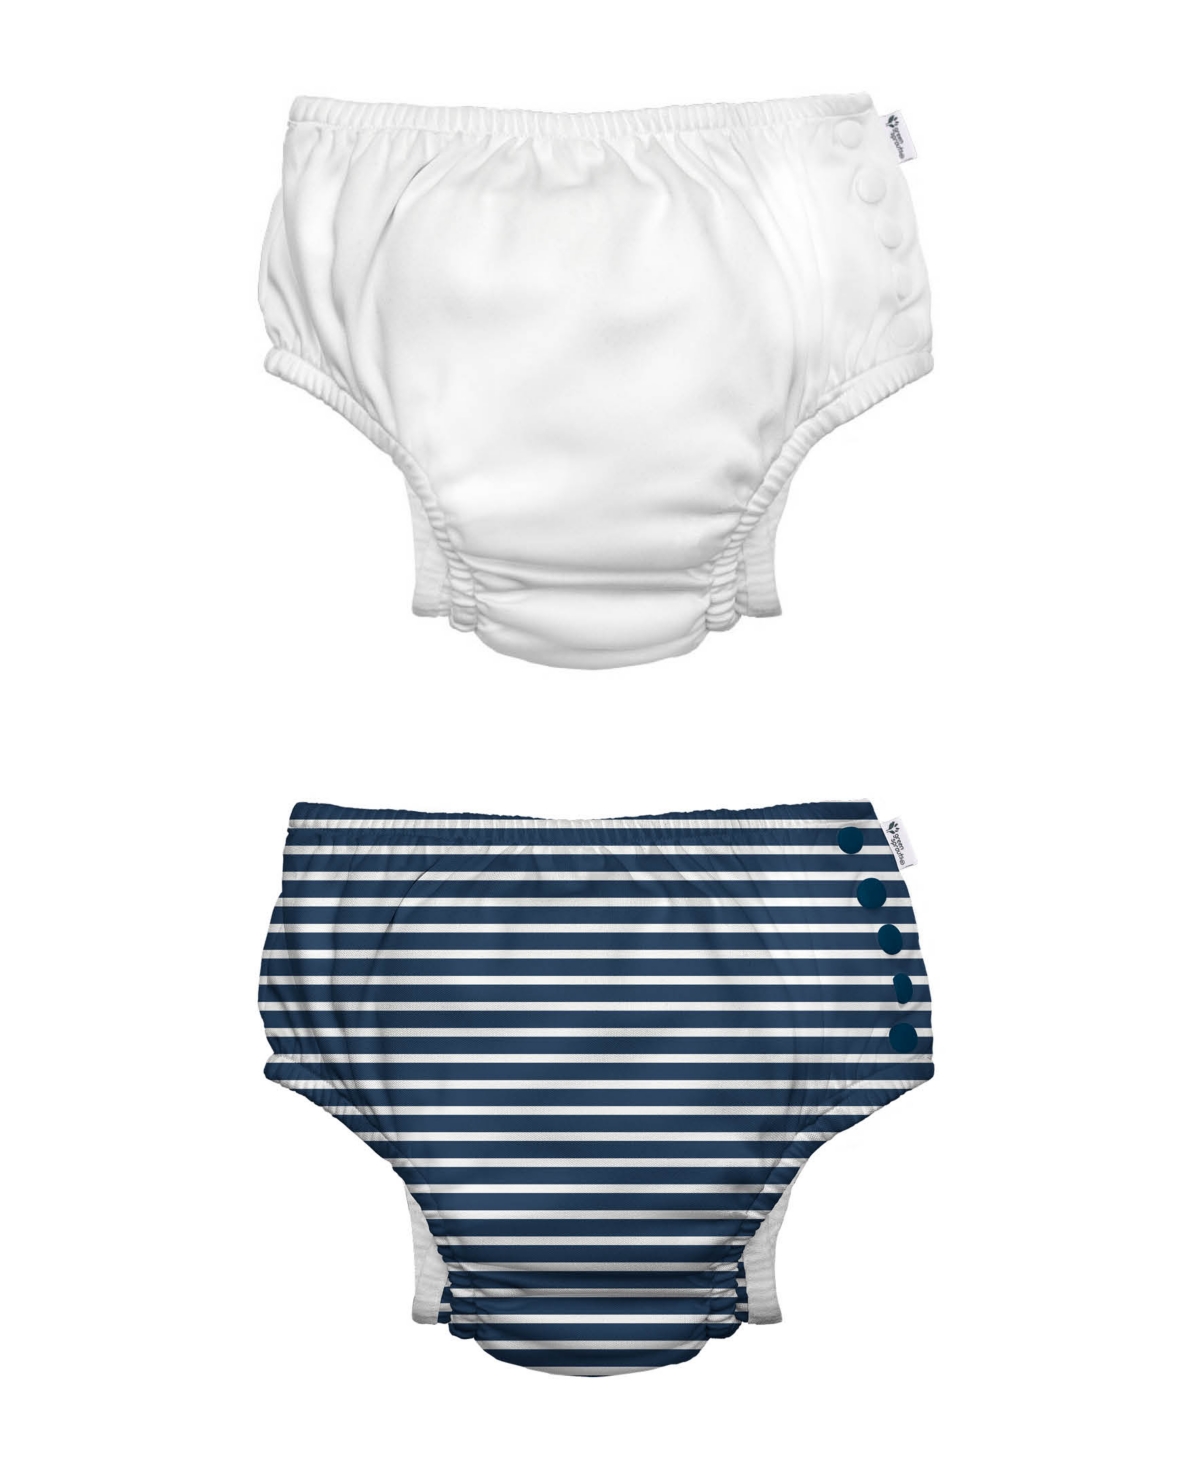 Green Sprouts Toddler Boys Or Toddler Girls Snap Swim Diaper, Pack Of 2 In Navy Stripe